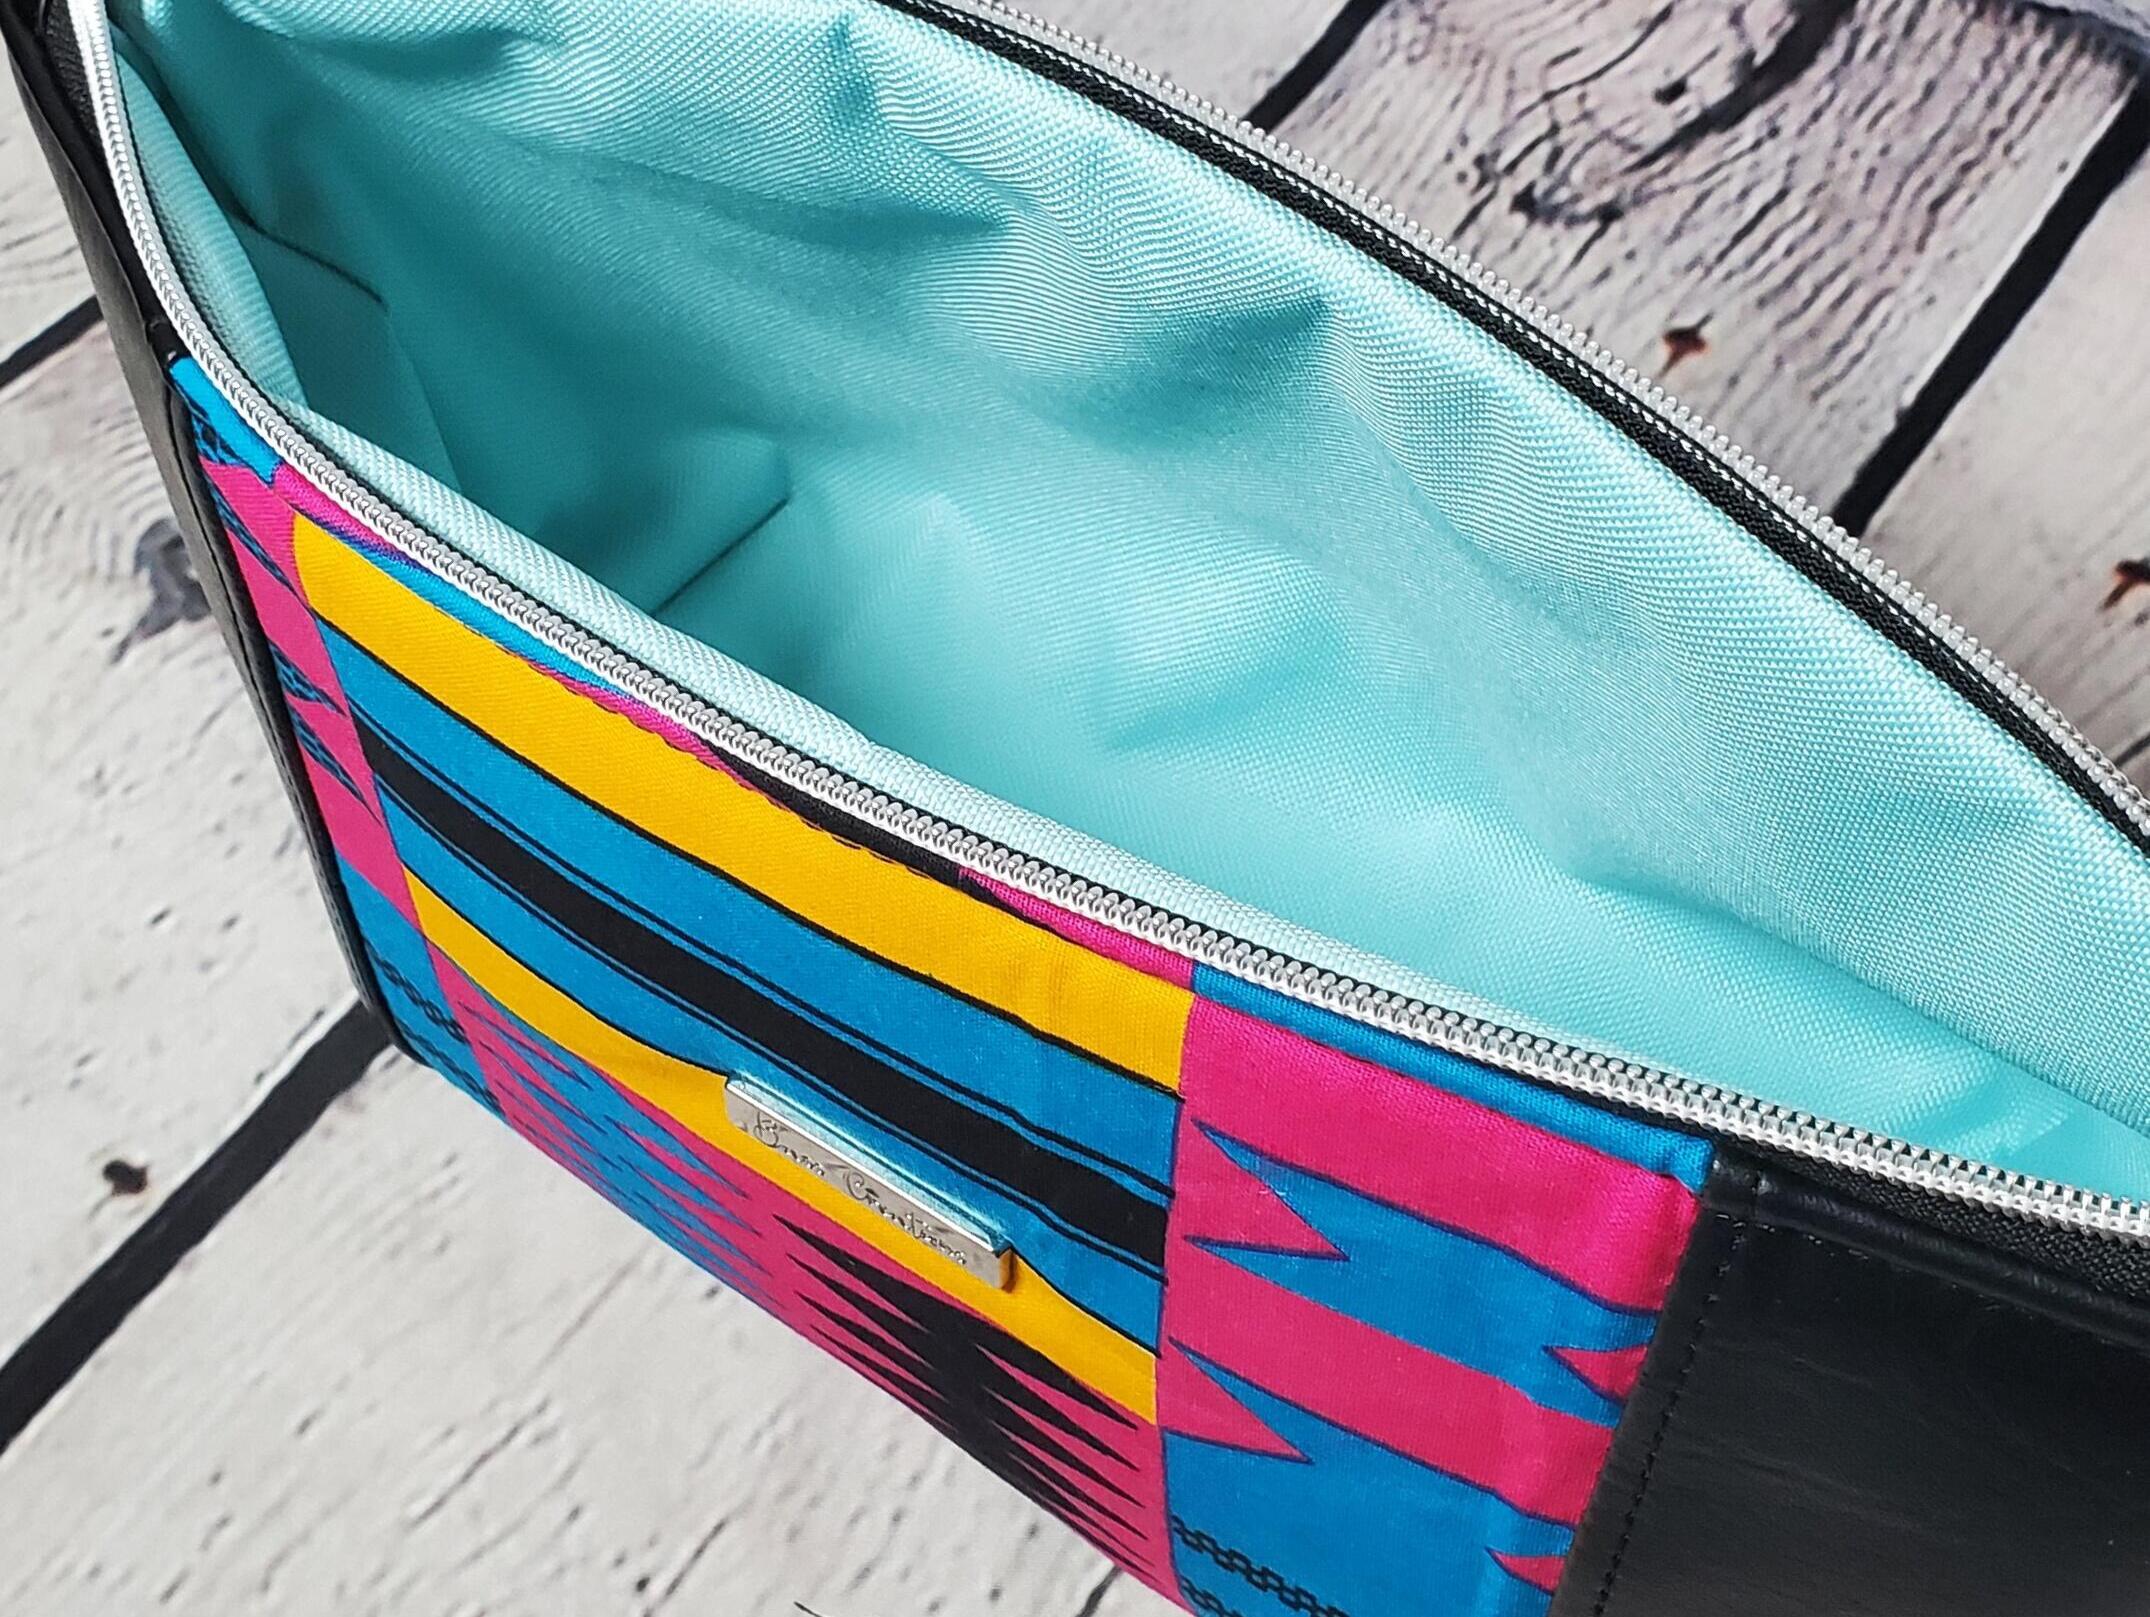 Pink blue and orange geometric print makeup bag with black faux leather accents, silver top zipper and silver Bass Creations logo. Aqua waterproof canvas lining.